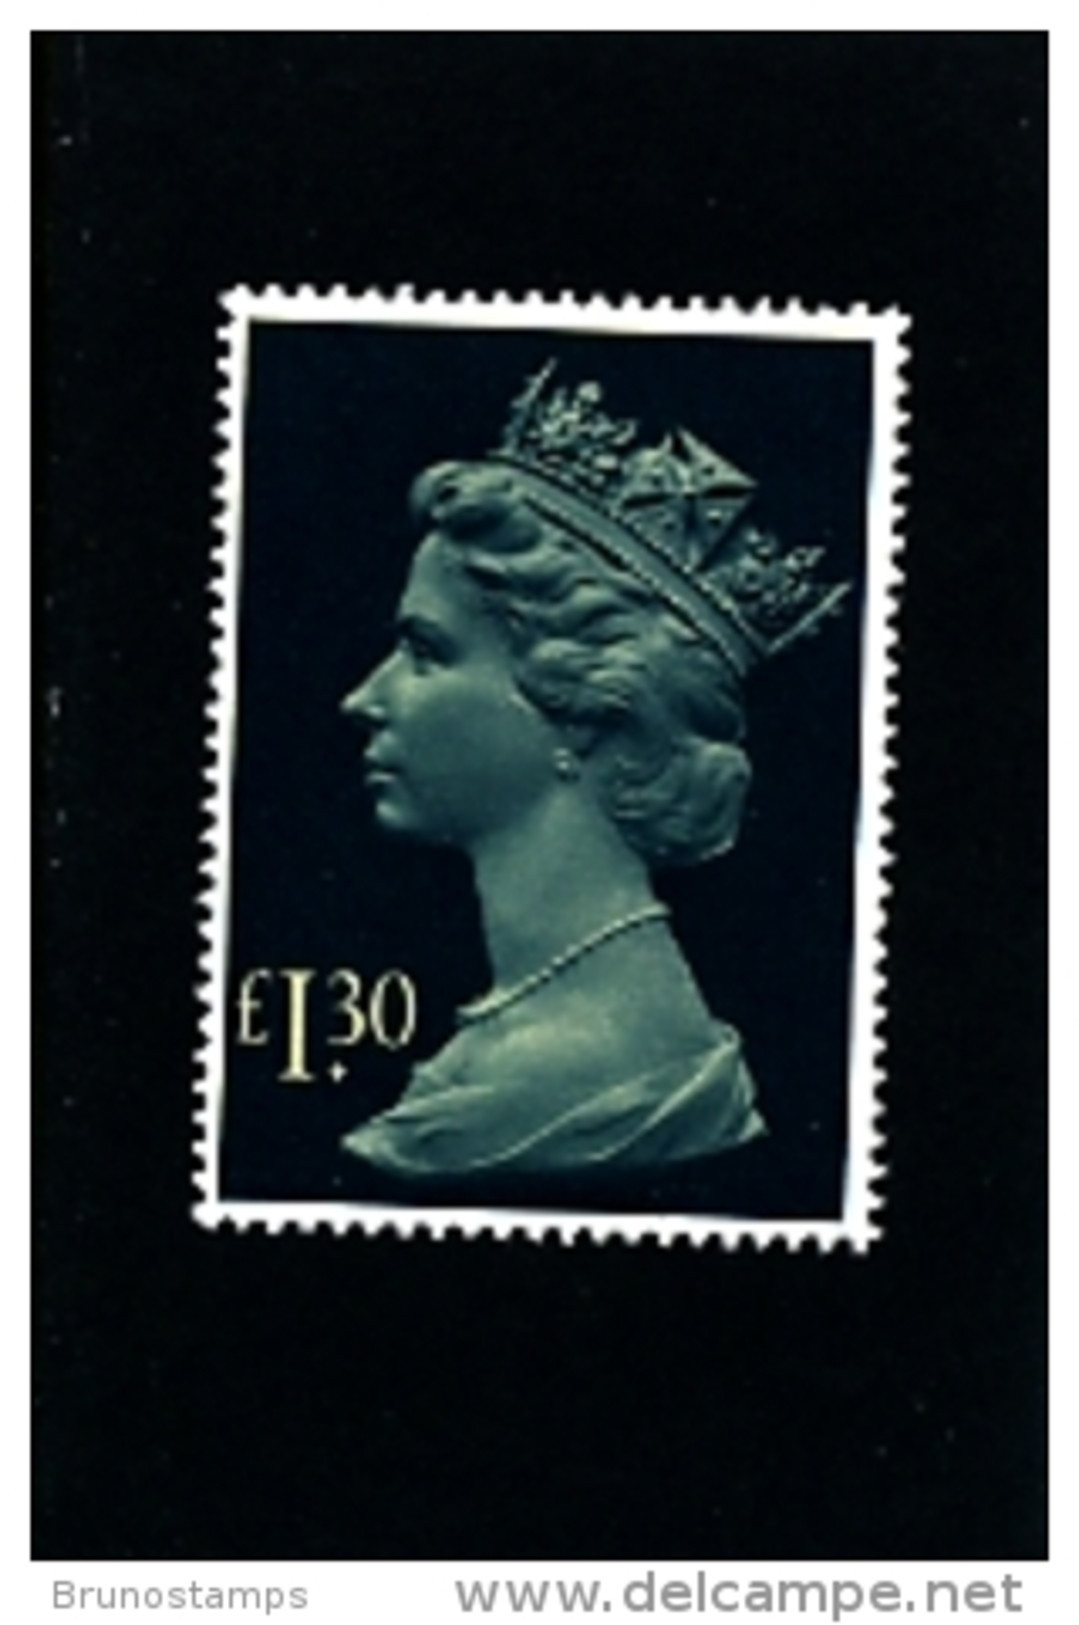 GREAT BRITAIN - 1983  £ 1.30  PARCEL  HIGH VALUE  MINT NH - Neufs